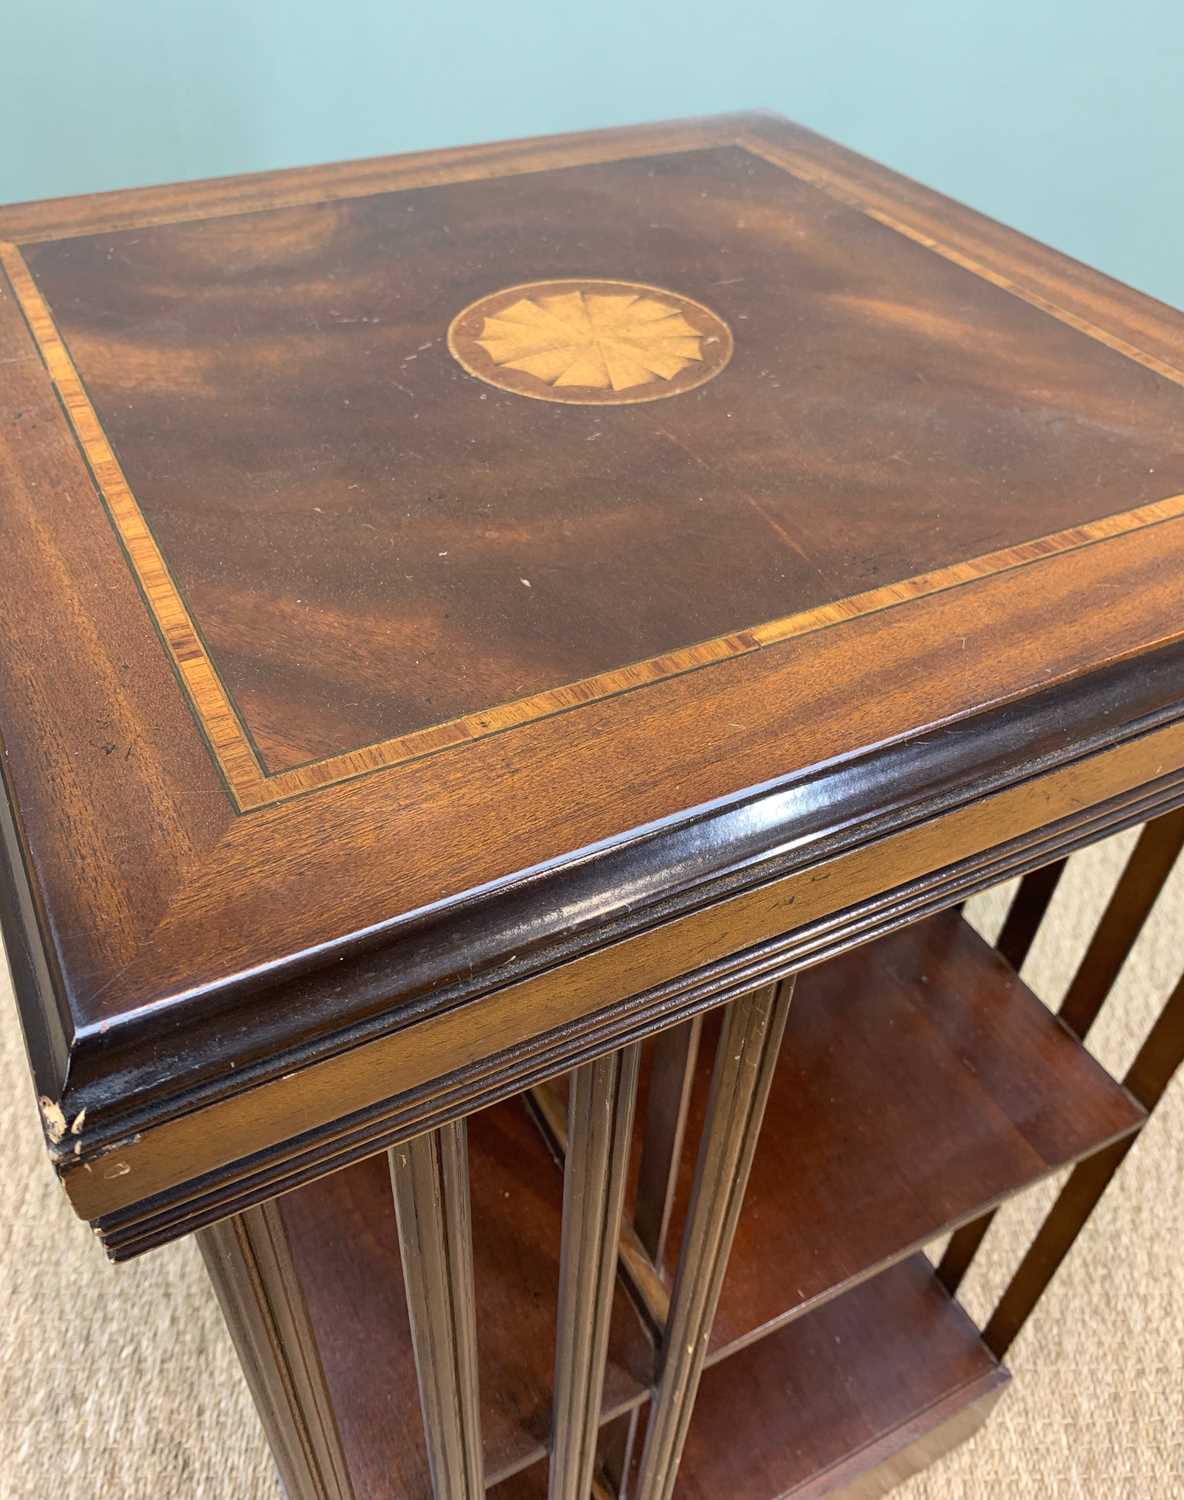 OCCASIONAL FURNITURE: comprising 20th C. Italian neoclassical marquetry side table, 74 (w) x - Image 6 of 6